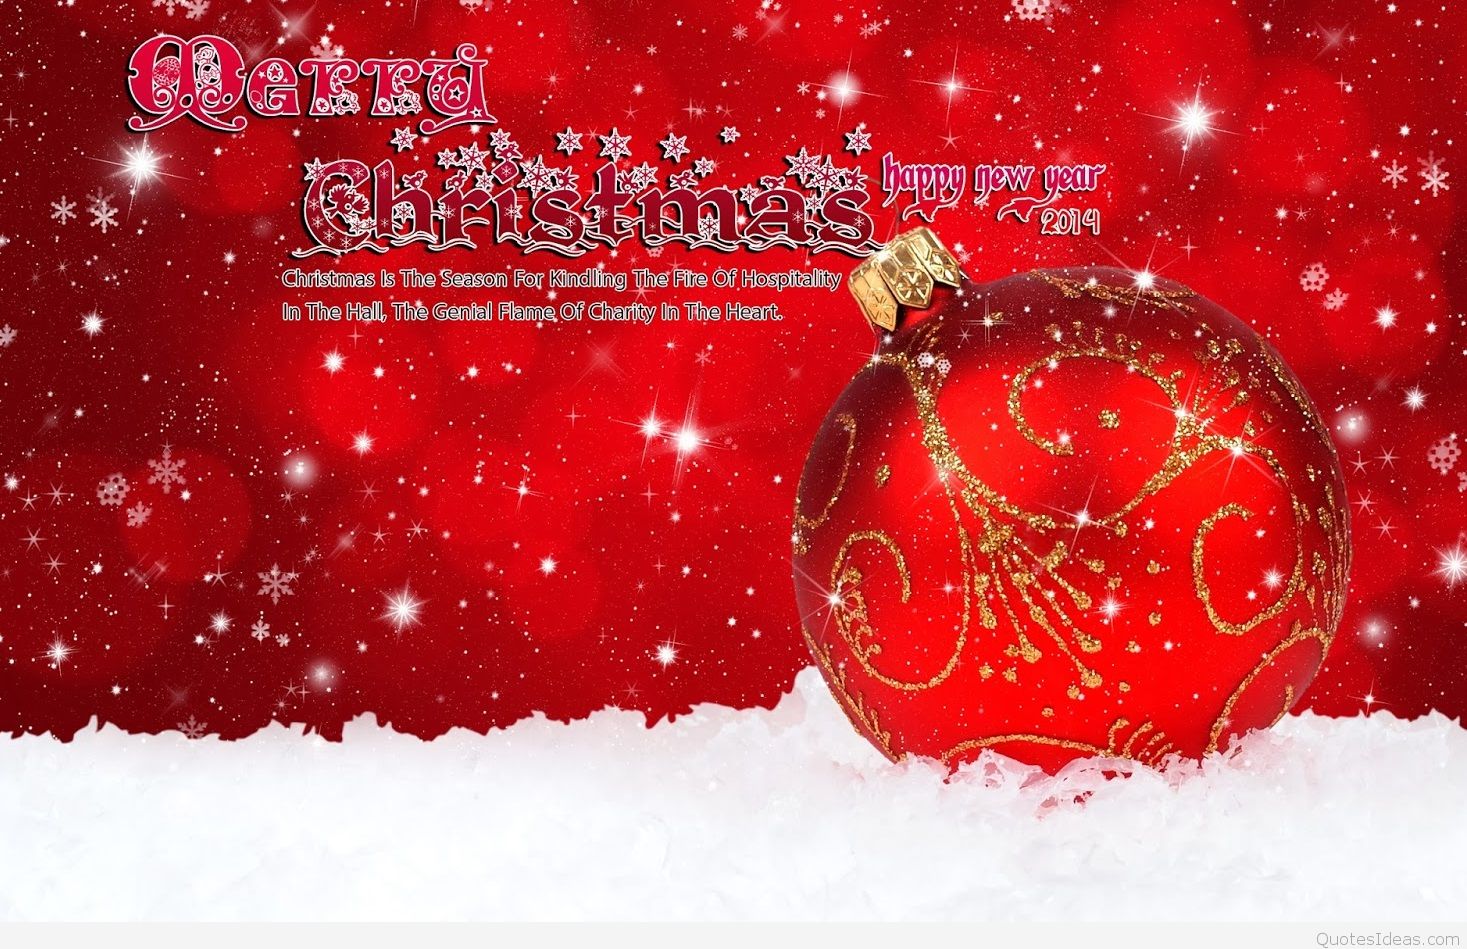 Wishes Merry Christmas Quotes With Greetings Wallpaper